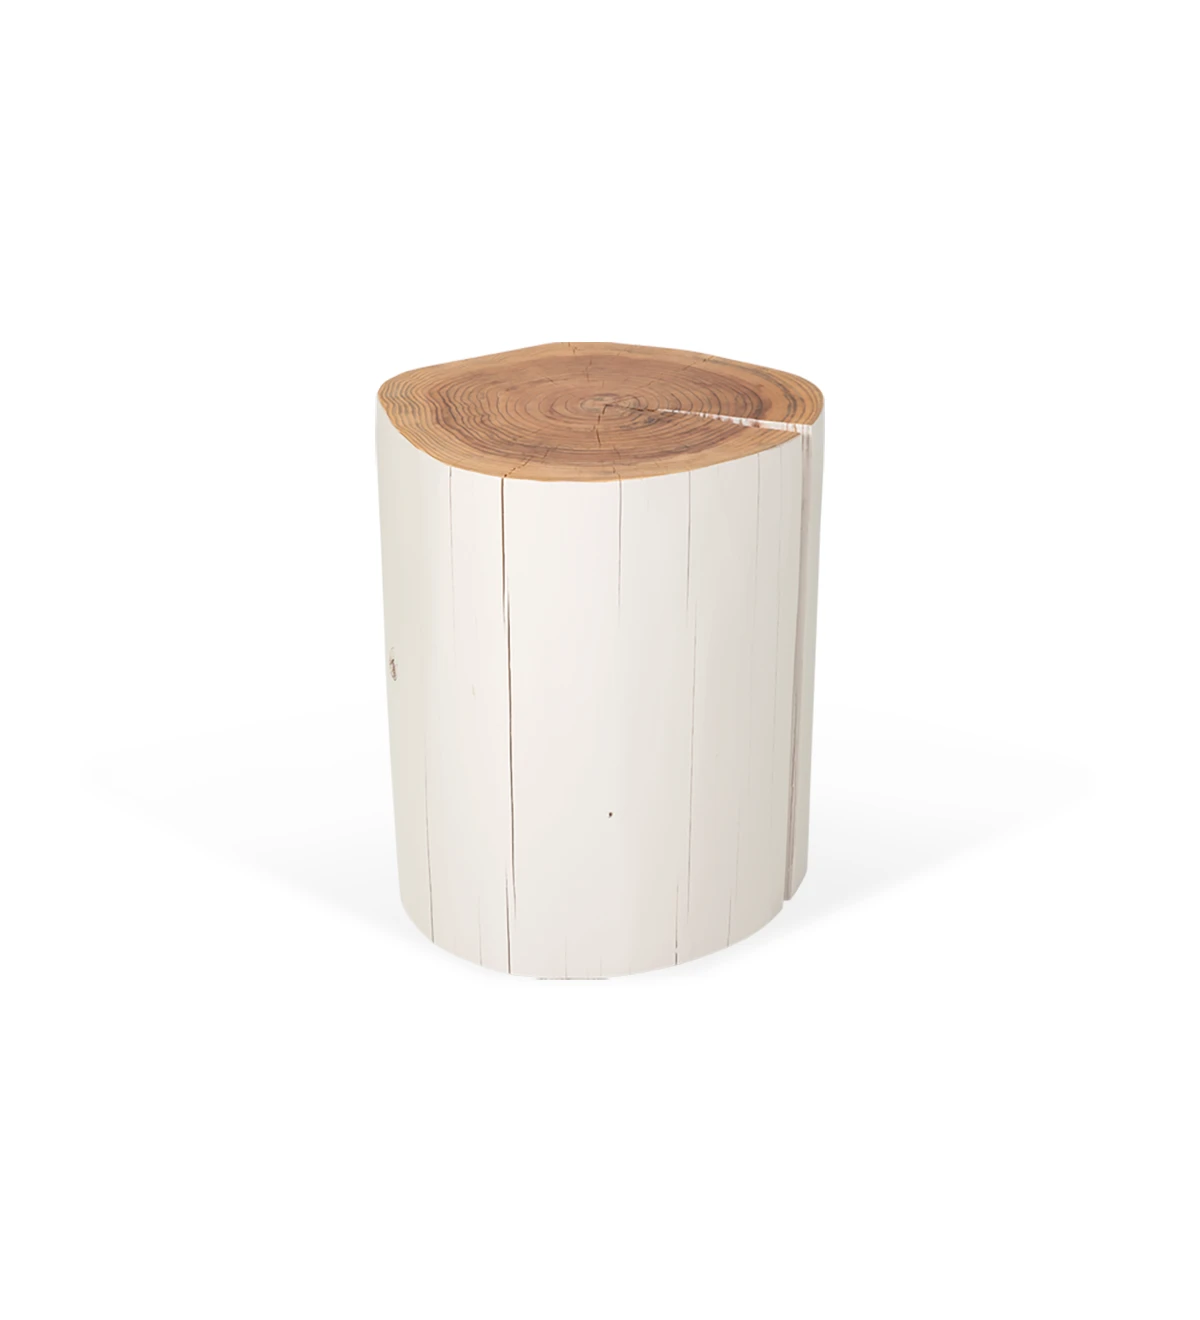 High trunk center table in natural cryptomeria wood lacquered in pearl, Ø 45 to 55 cm.